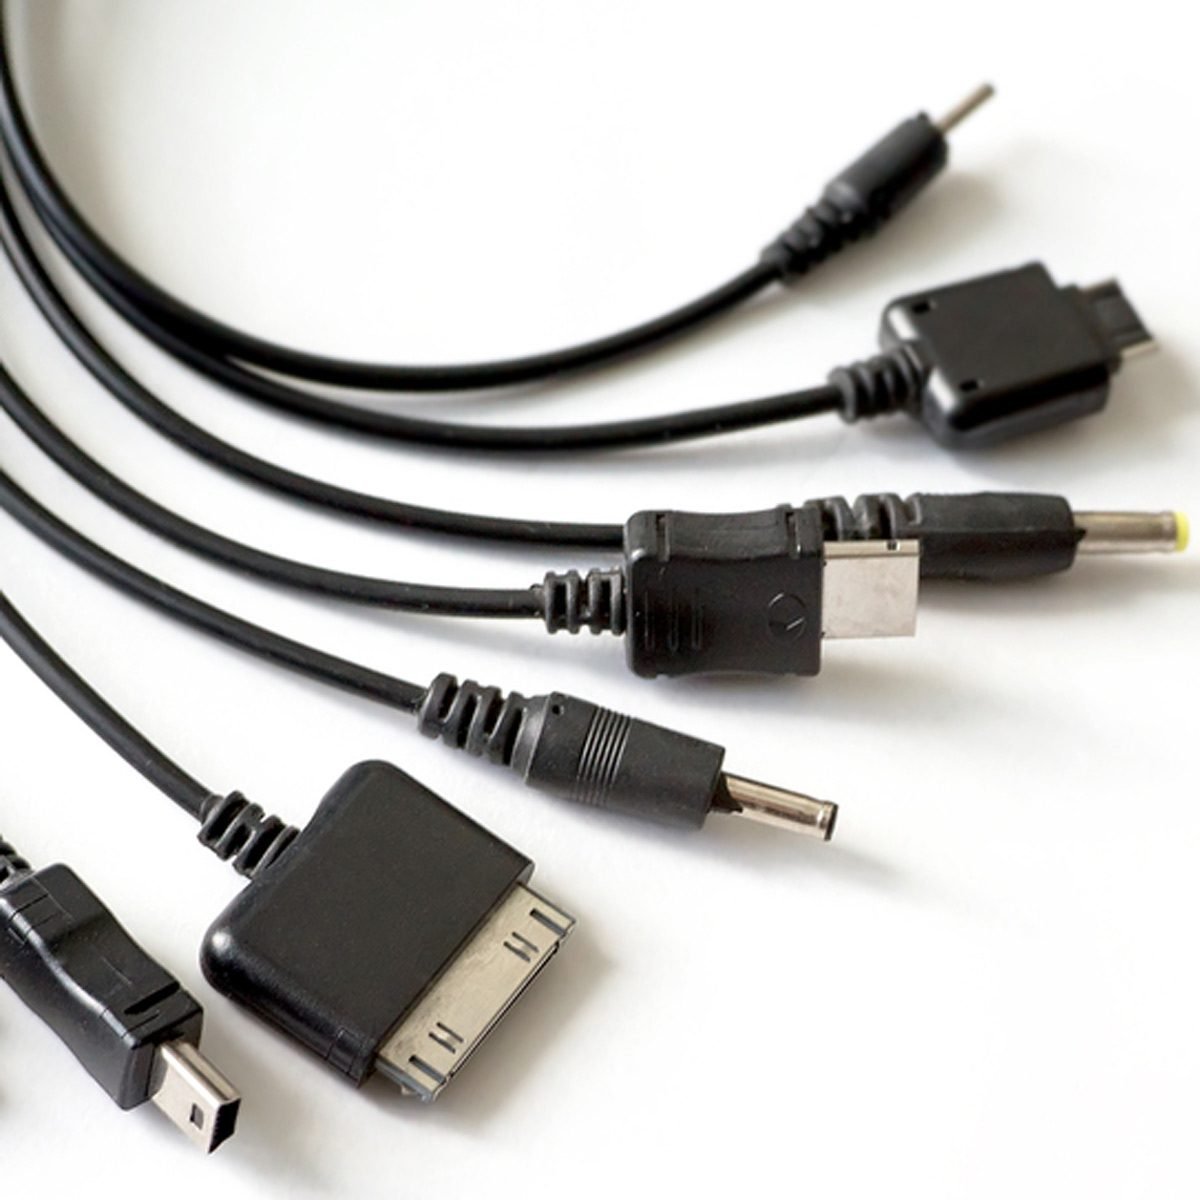 Here’s What to do With Your Old Chargers and Cables